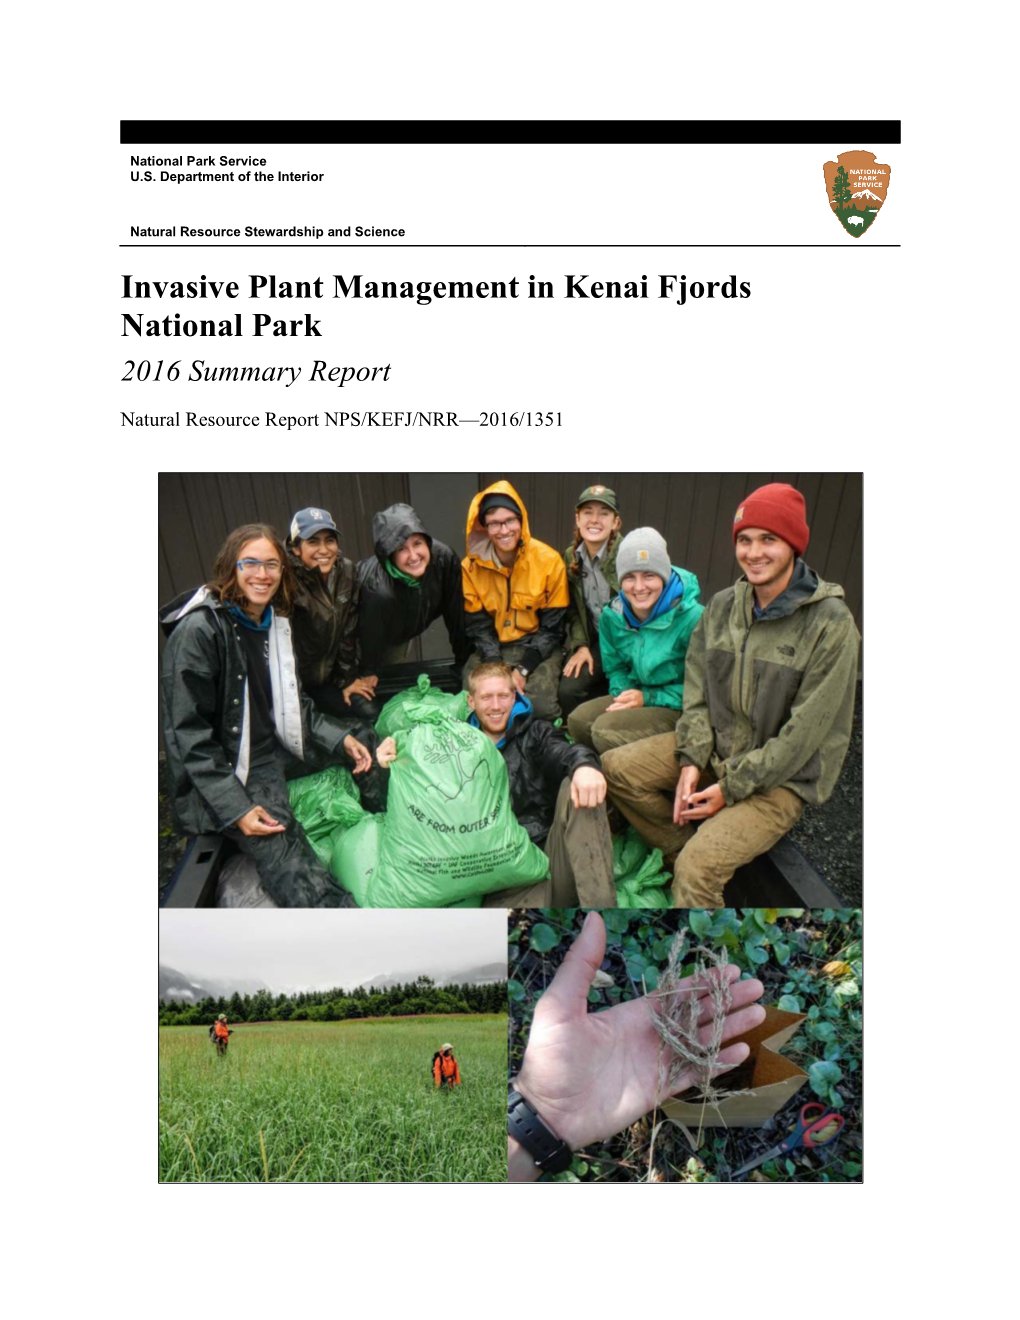 Invasive Plant Management in Kenai Fjords National Park 2016 Summary Report